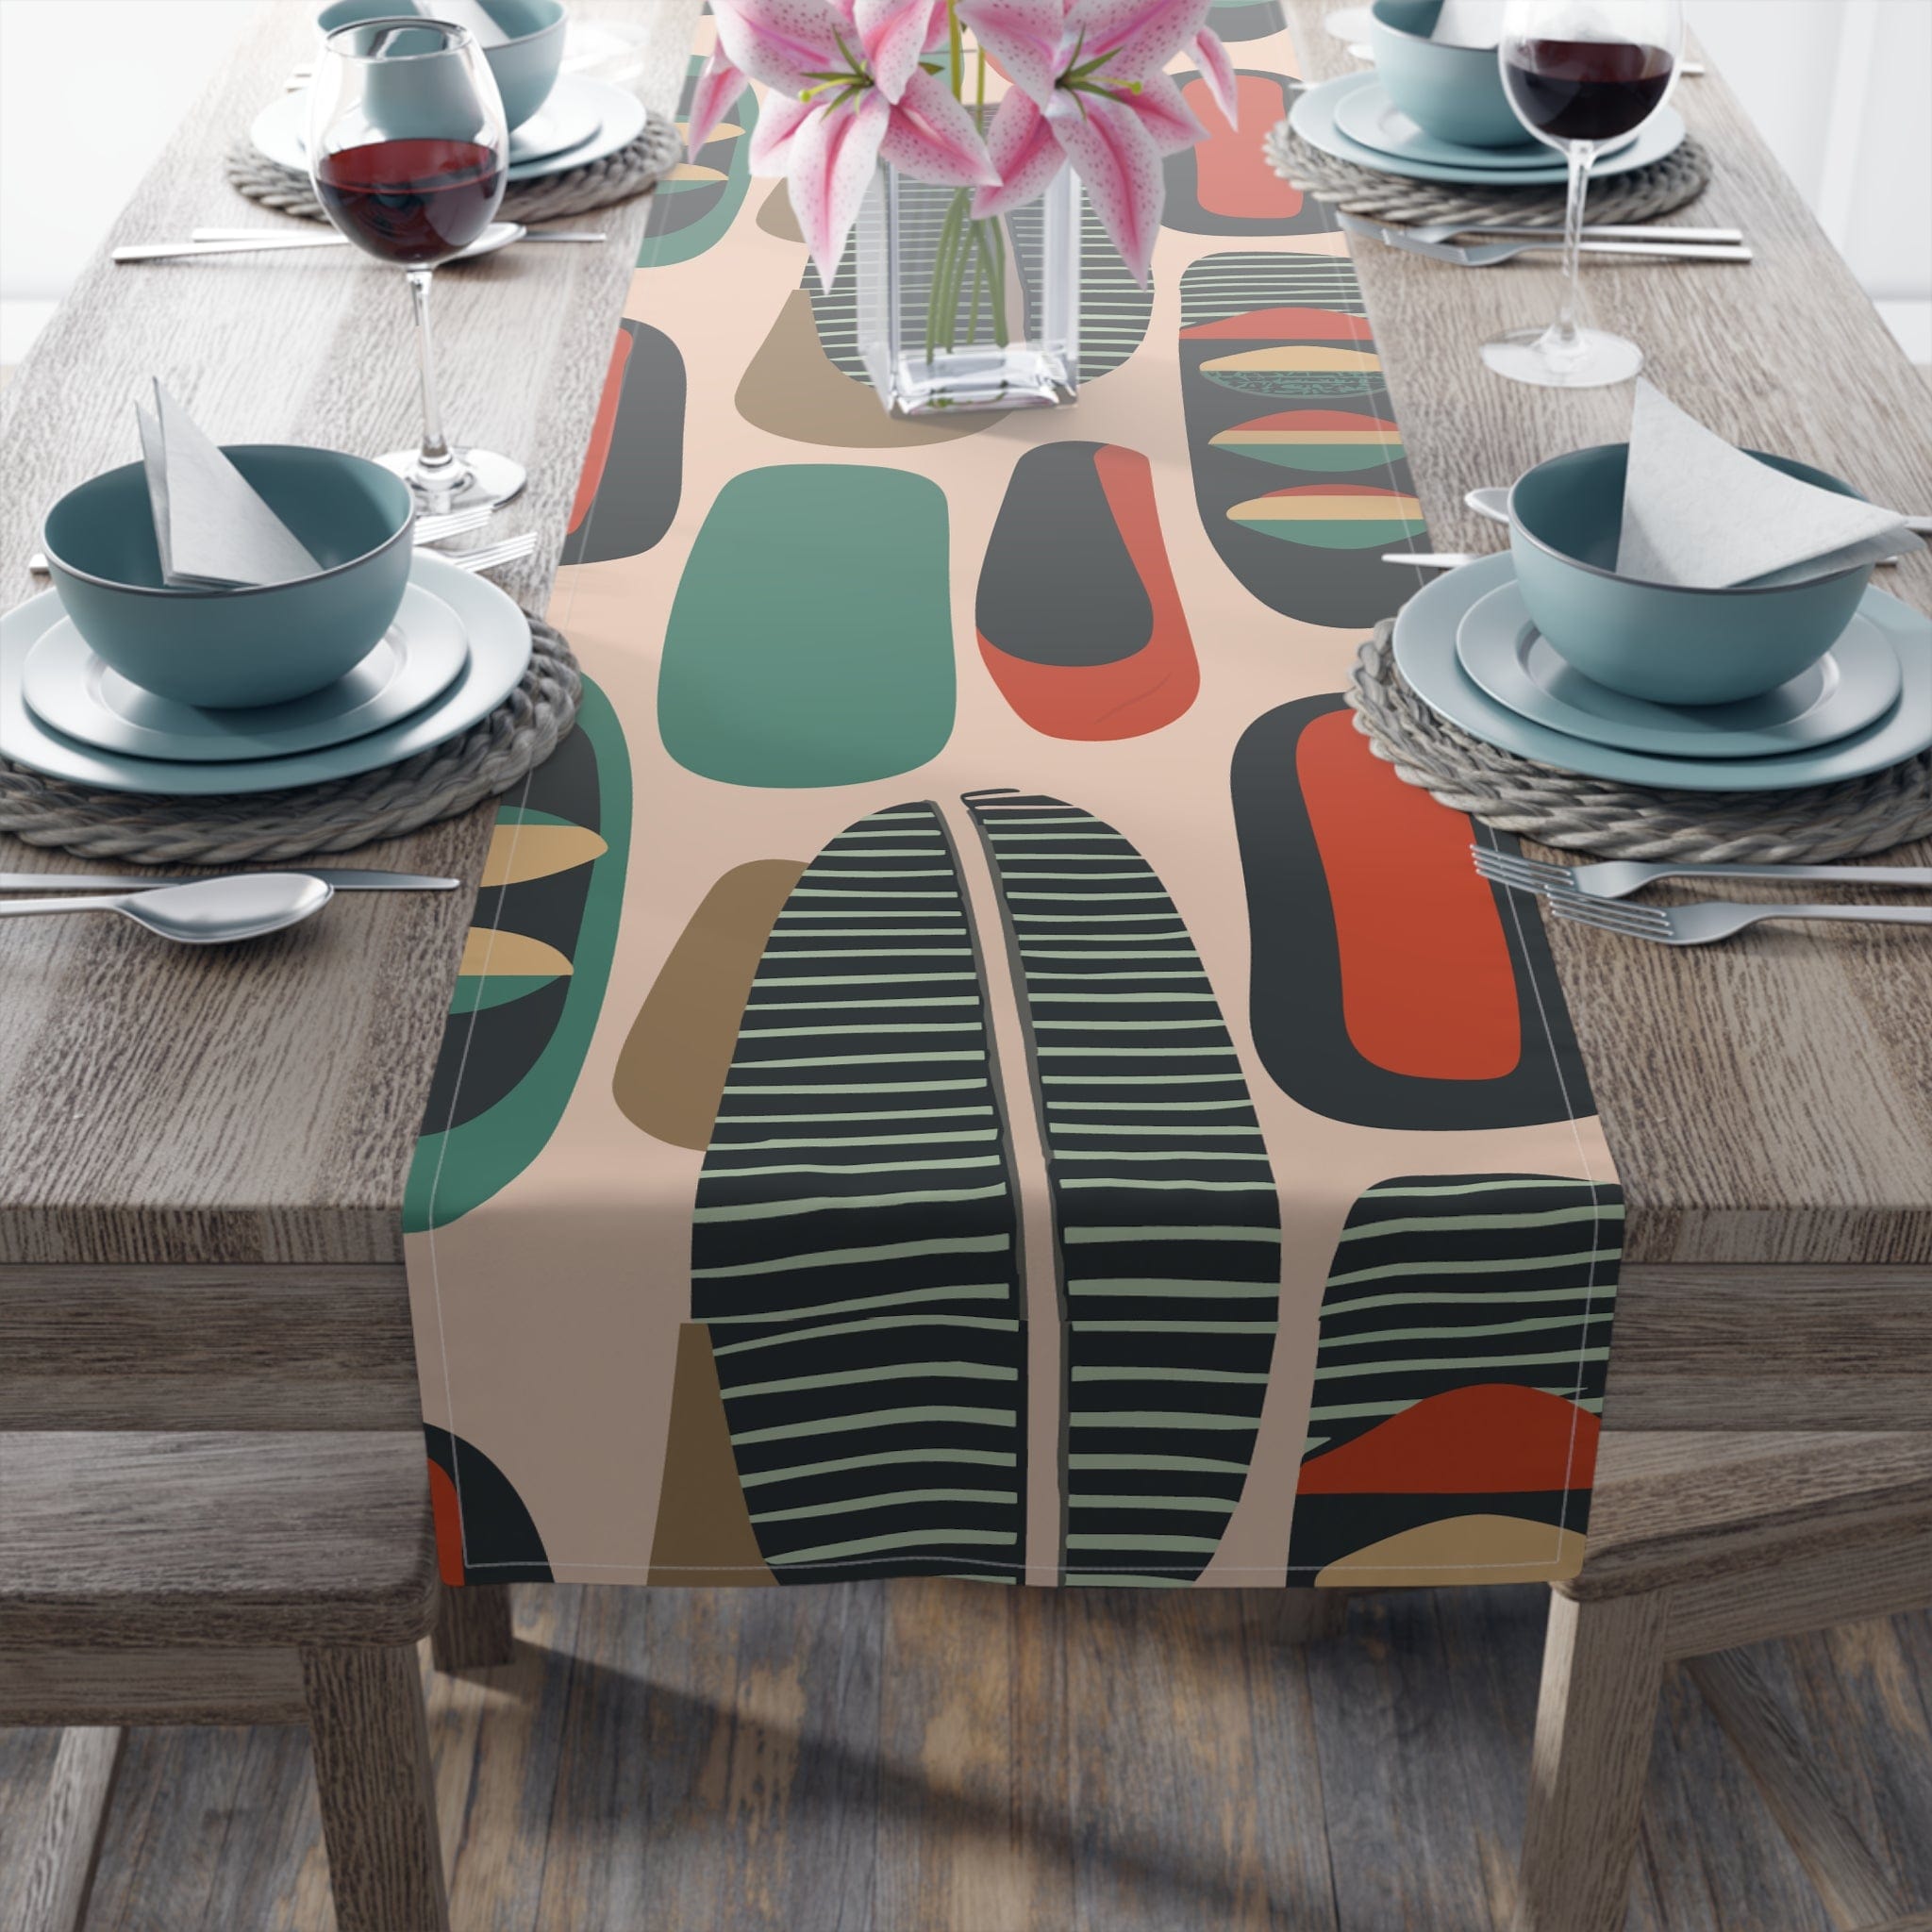 Kate McEnroe New York Retro Mod Table Runner, MCM Geometric Dining Decor, Abstract Shapes Table Linen, Mid Century Modern Table Accessory Table Runners 16&quot; × 72&quot; / Cotton Twill 23247645897037943048